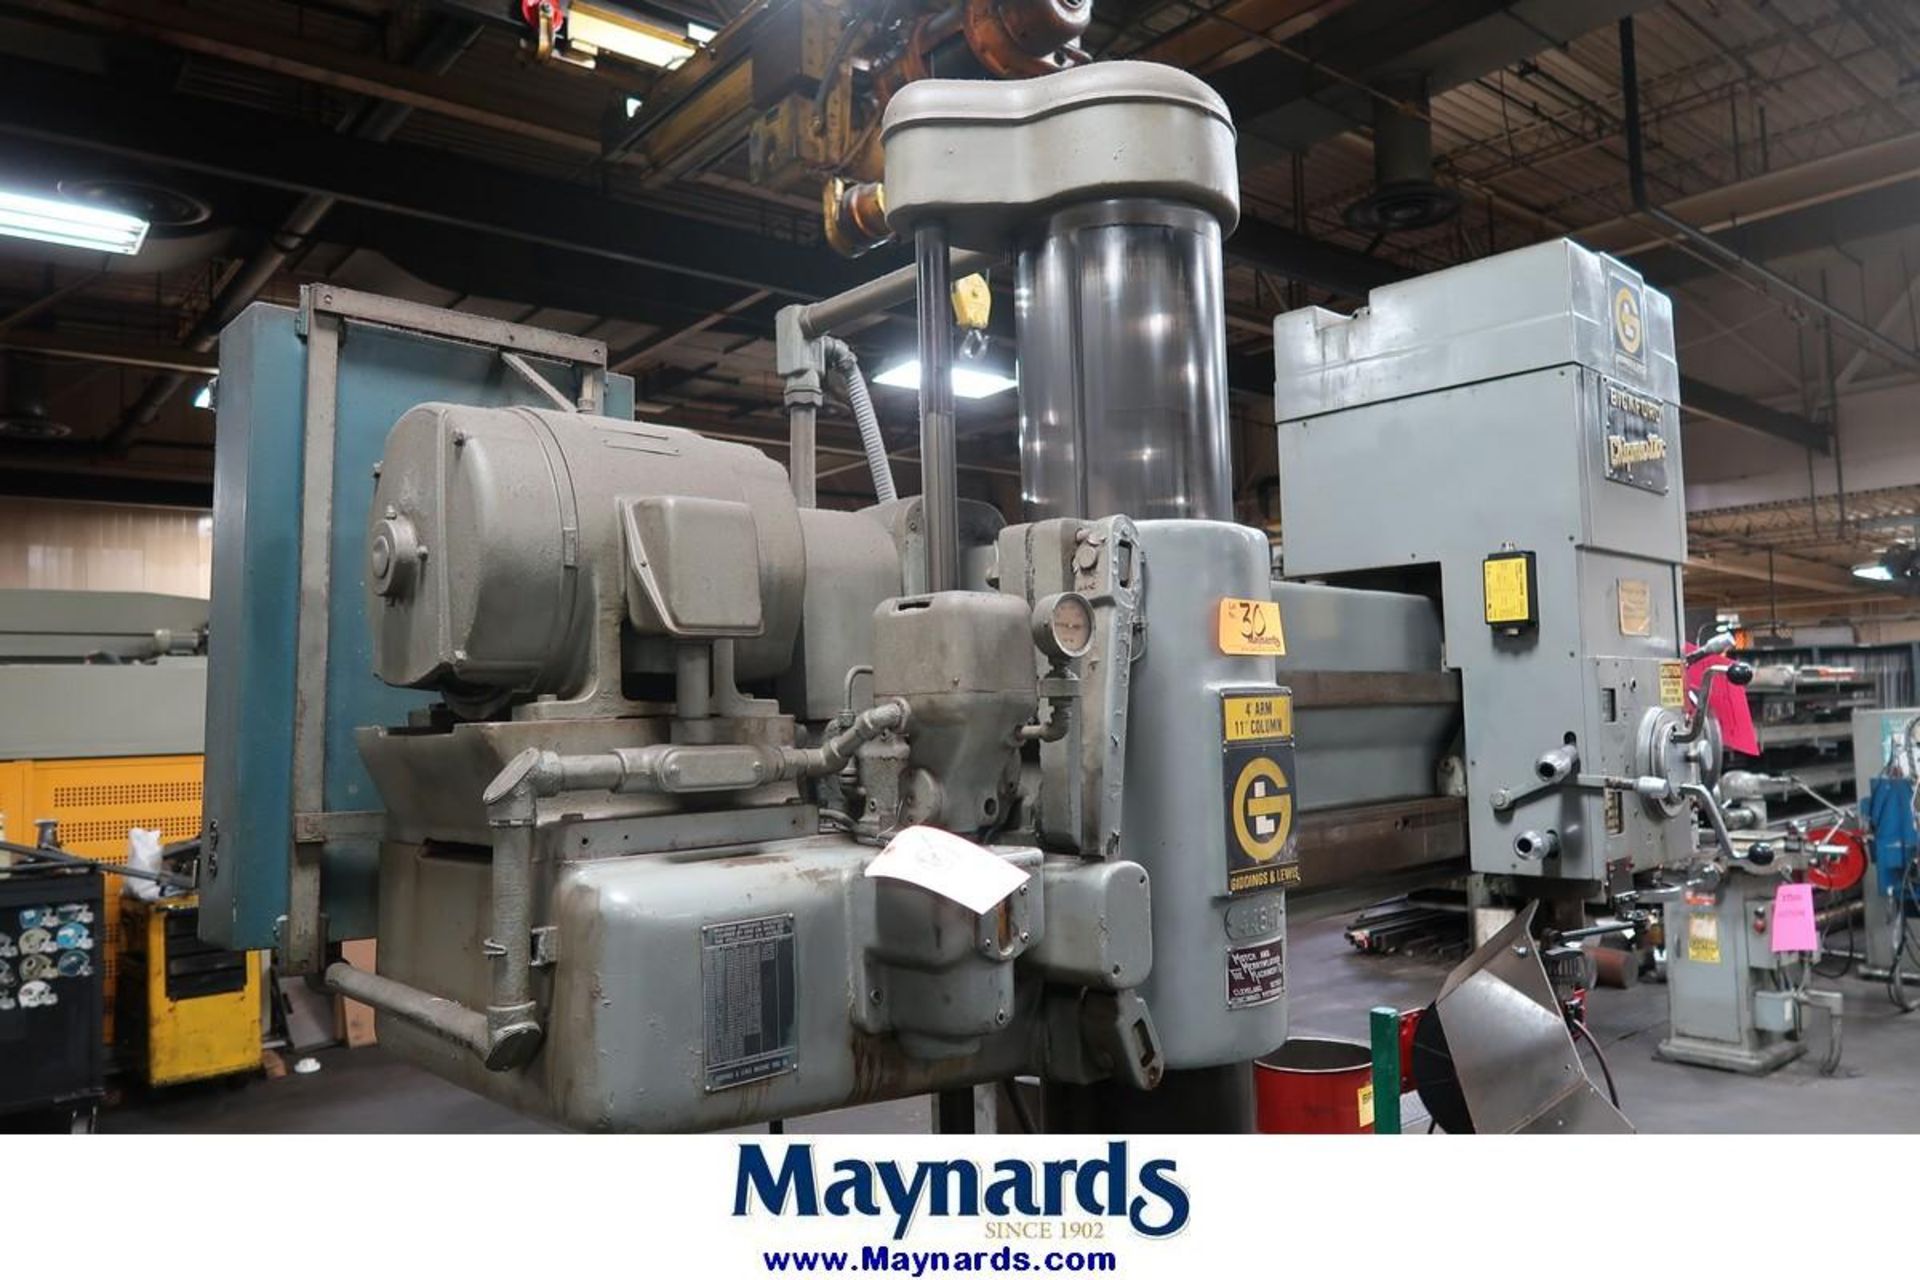 Gidding & Lewis Bickford Chip master 4' Arm x 11" Column Radial Arm Drill - Image 7 of 7